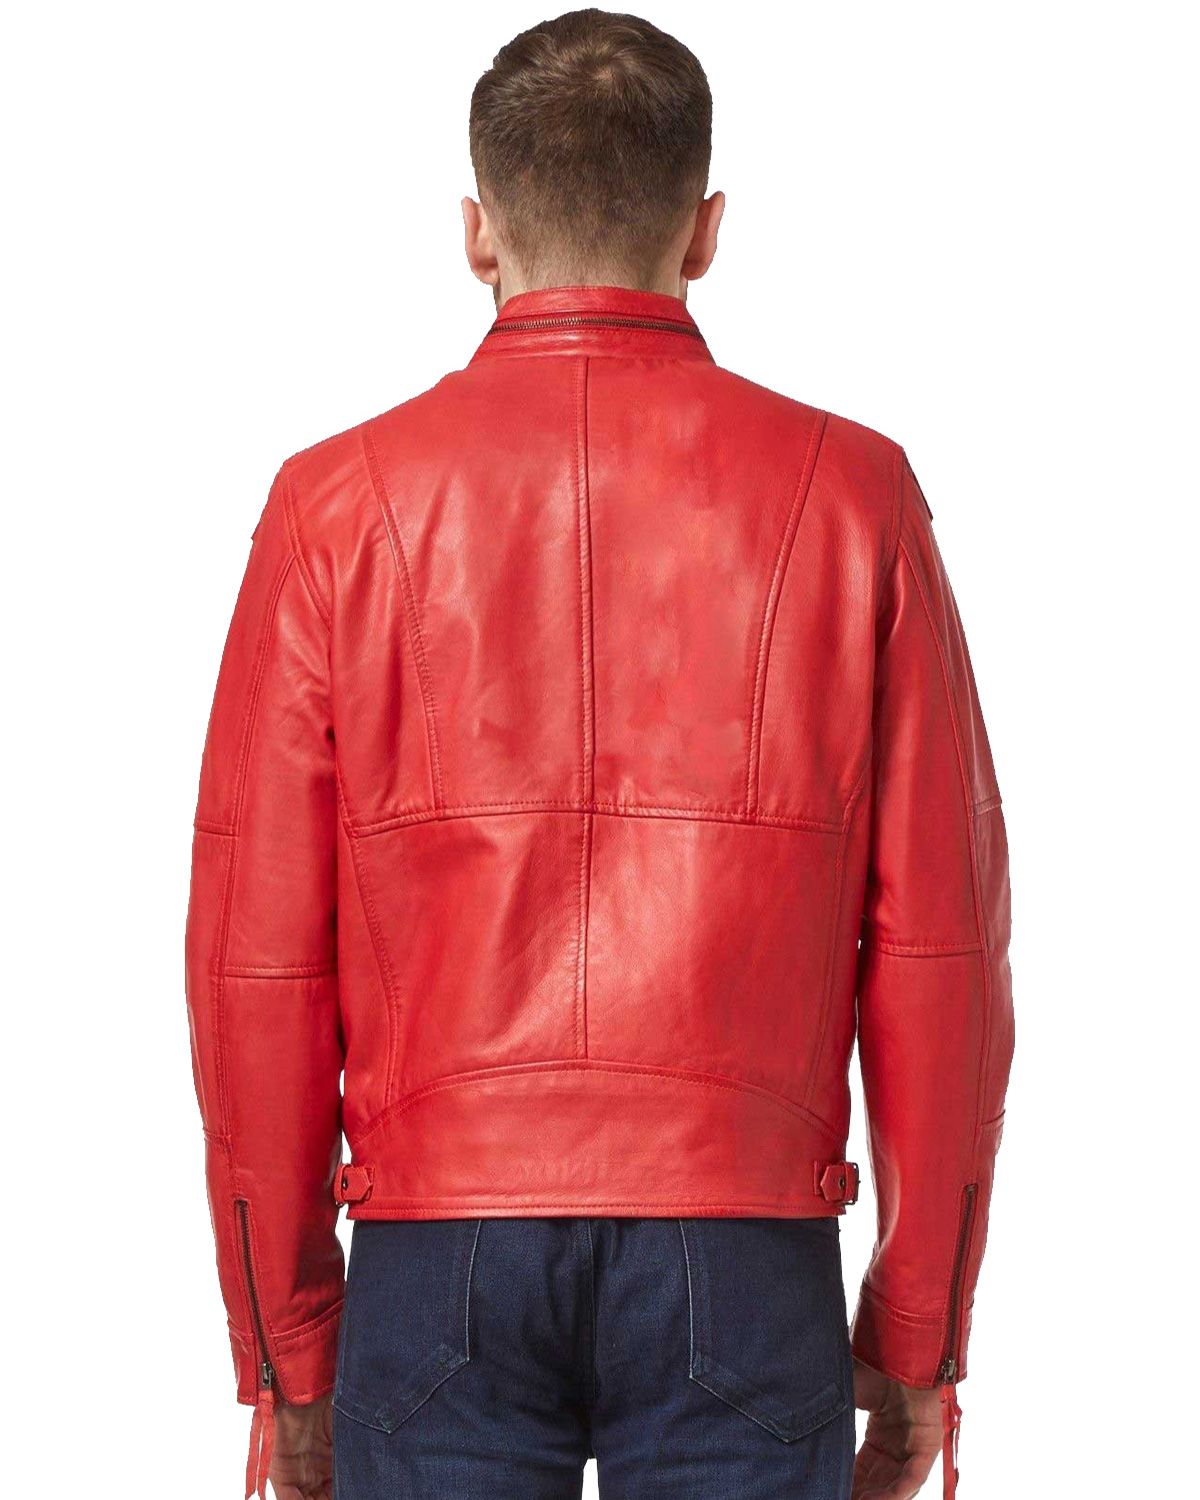 Men's Classic Stylish Red Biker Real Leather Jacket